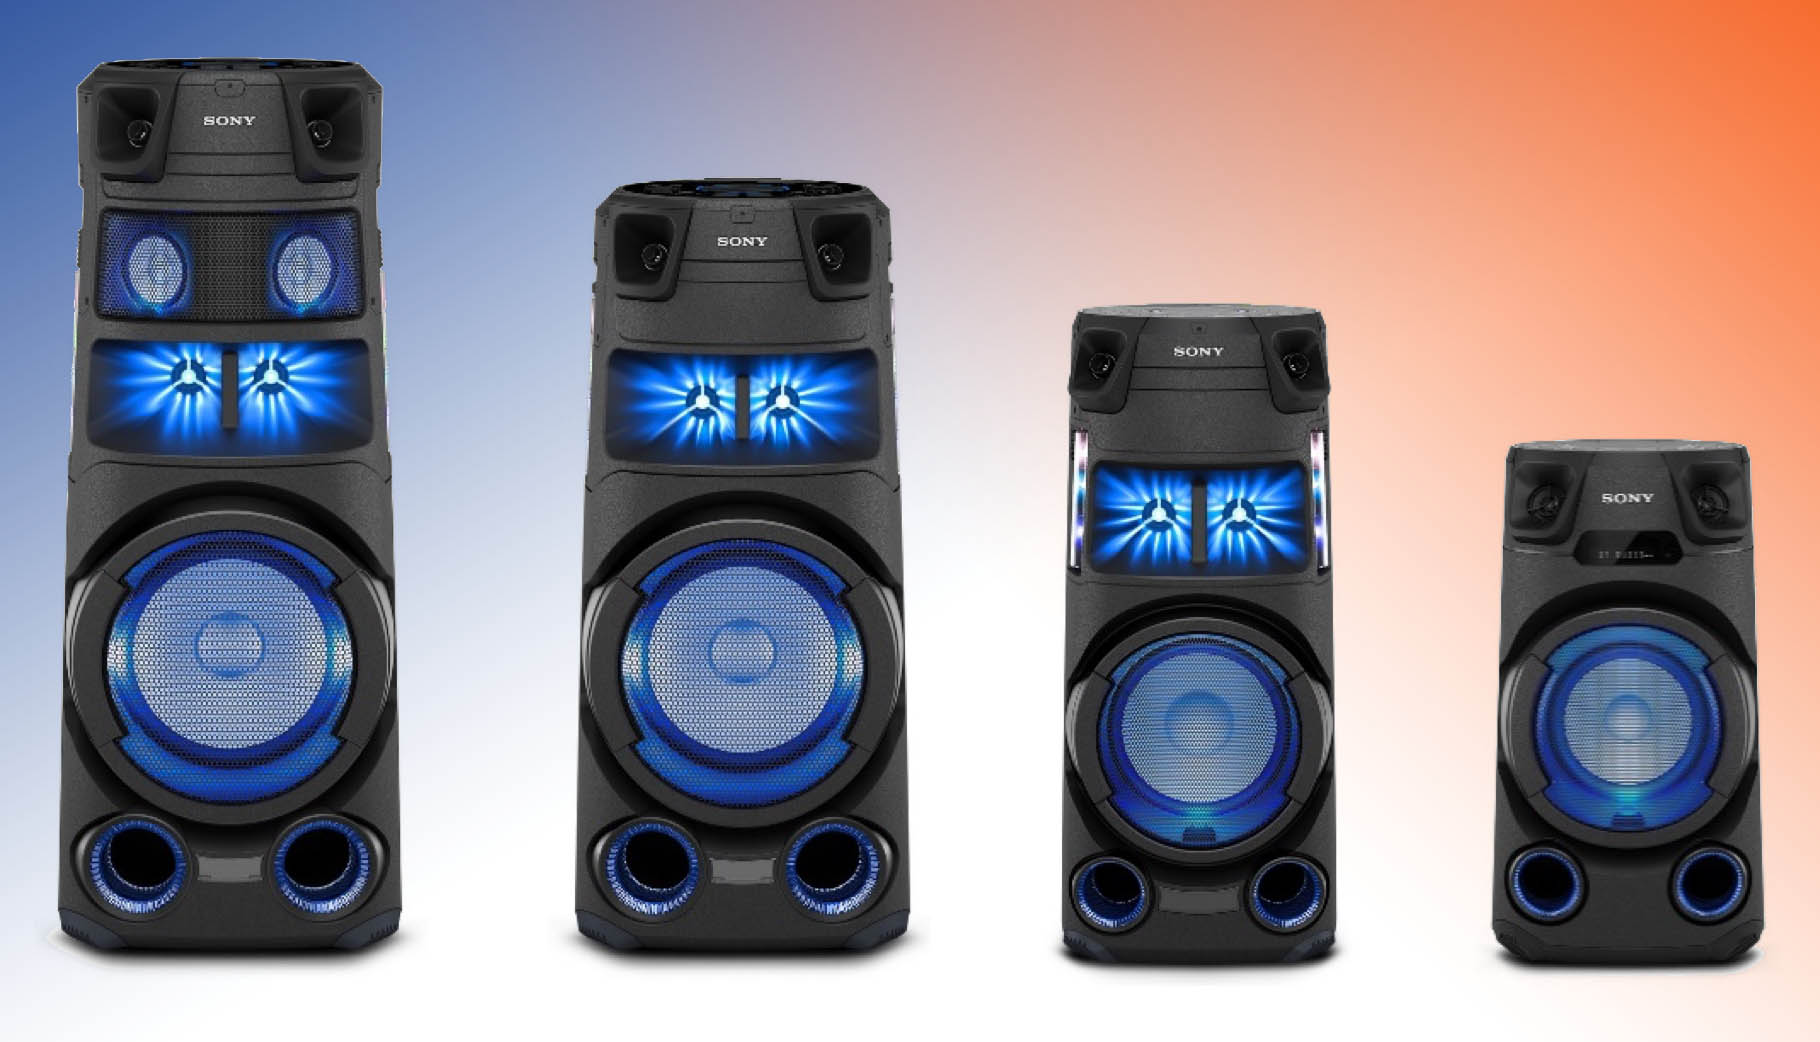 Introducing Sony’s new line-up of High Power Audio Systems for the ultimate entertainment